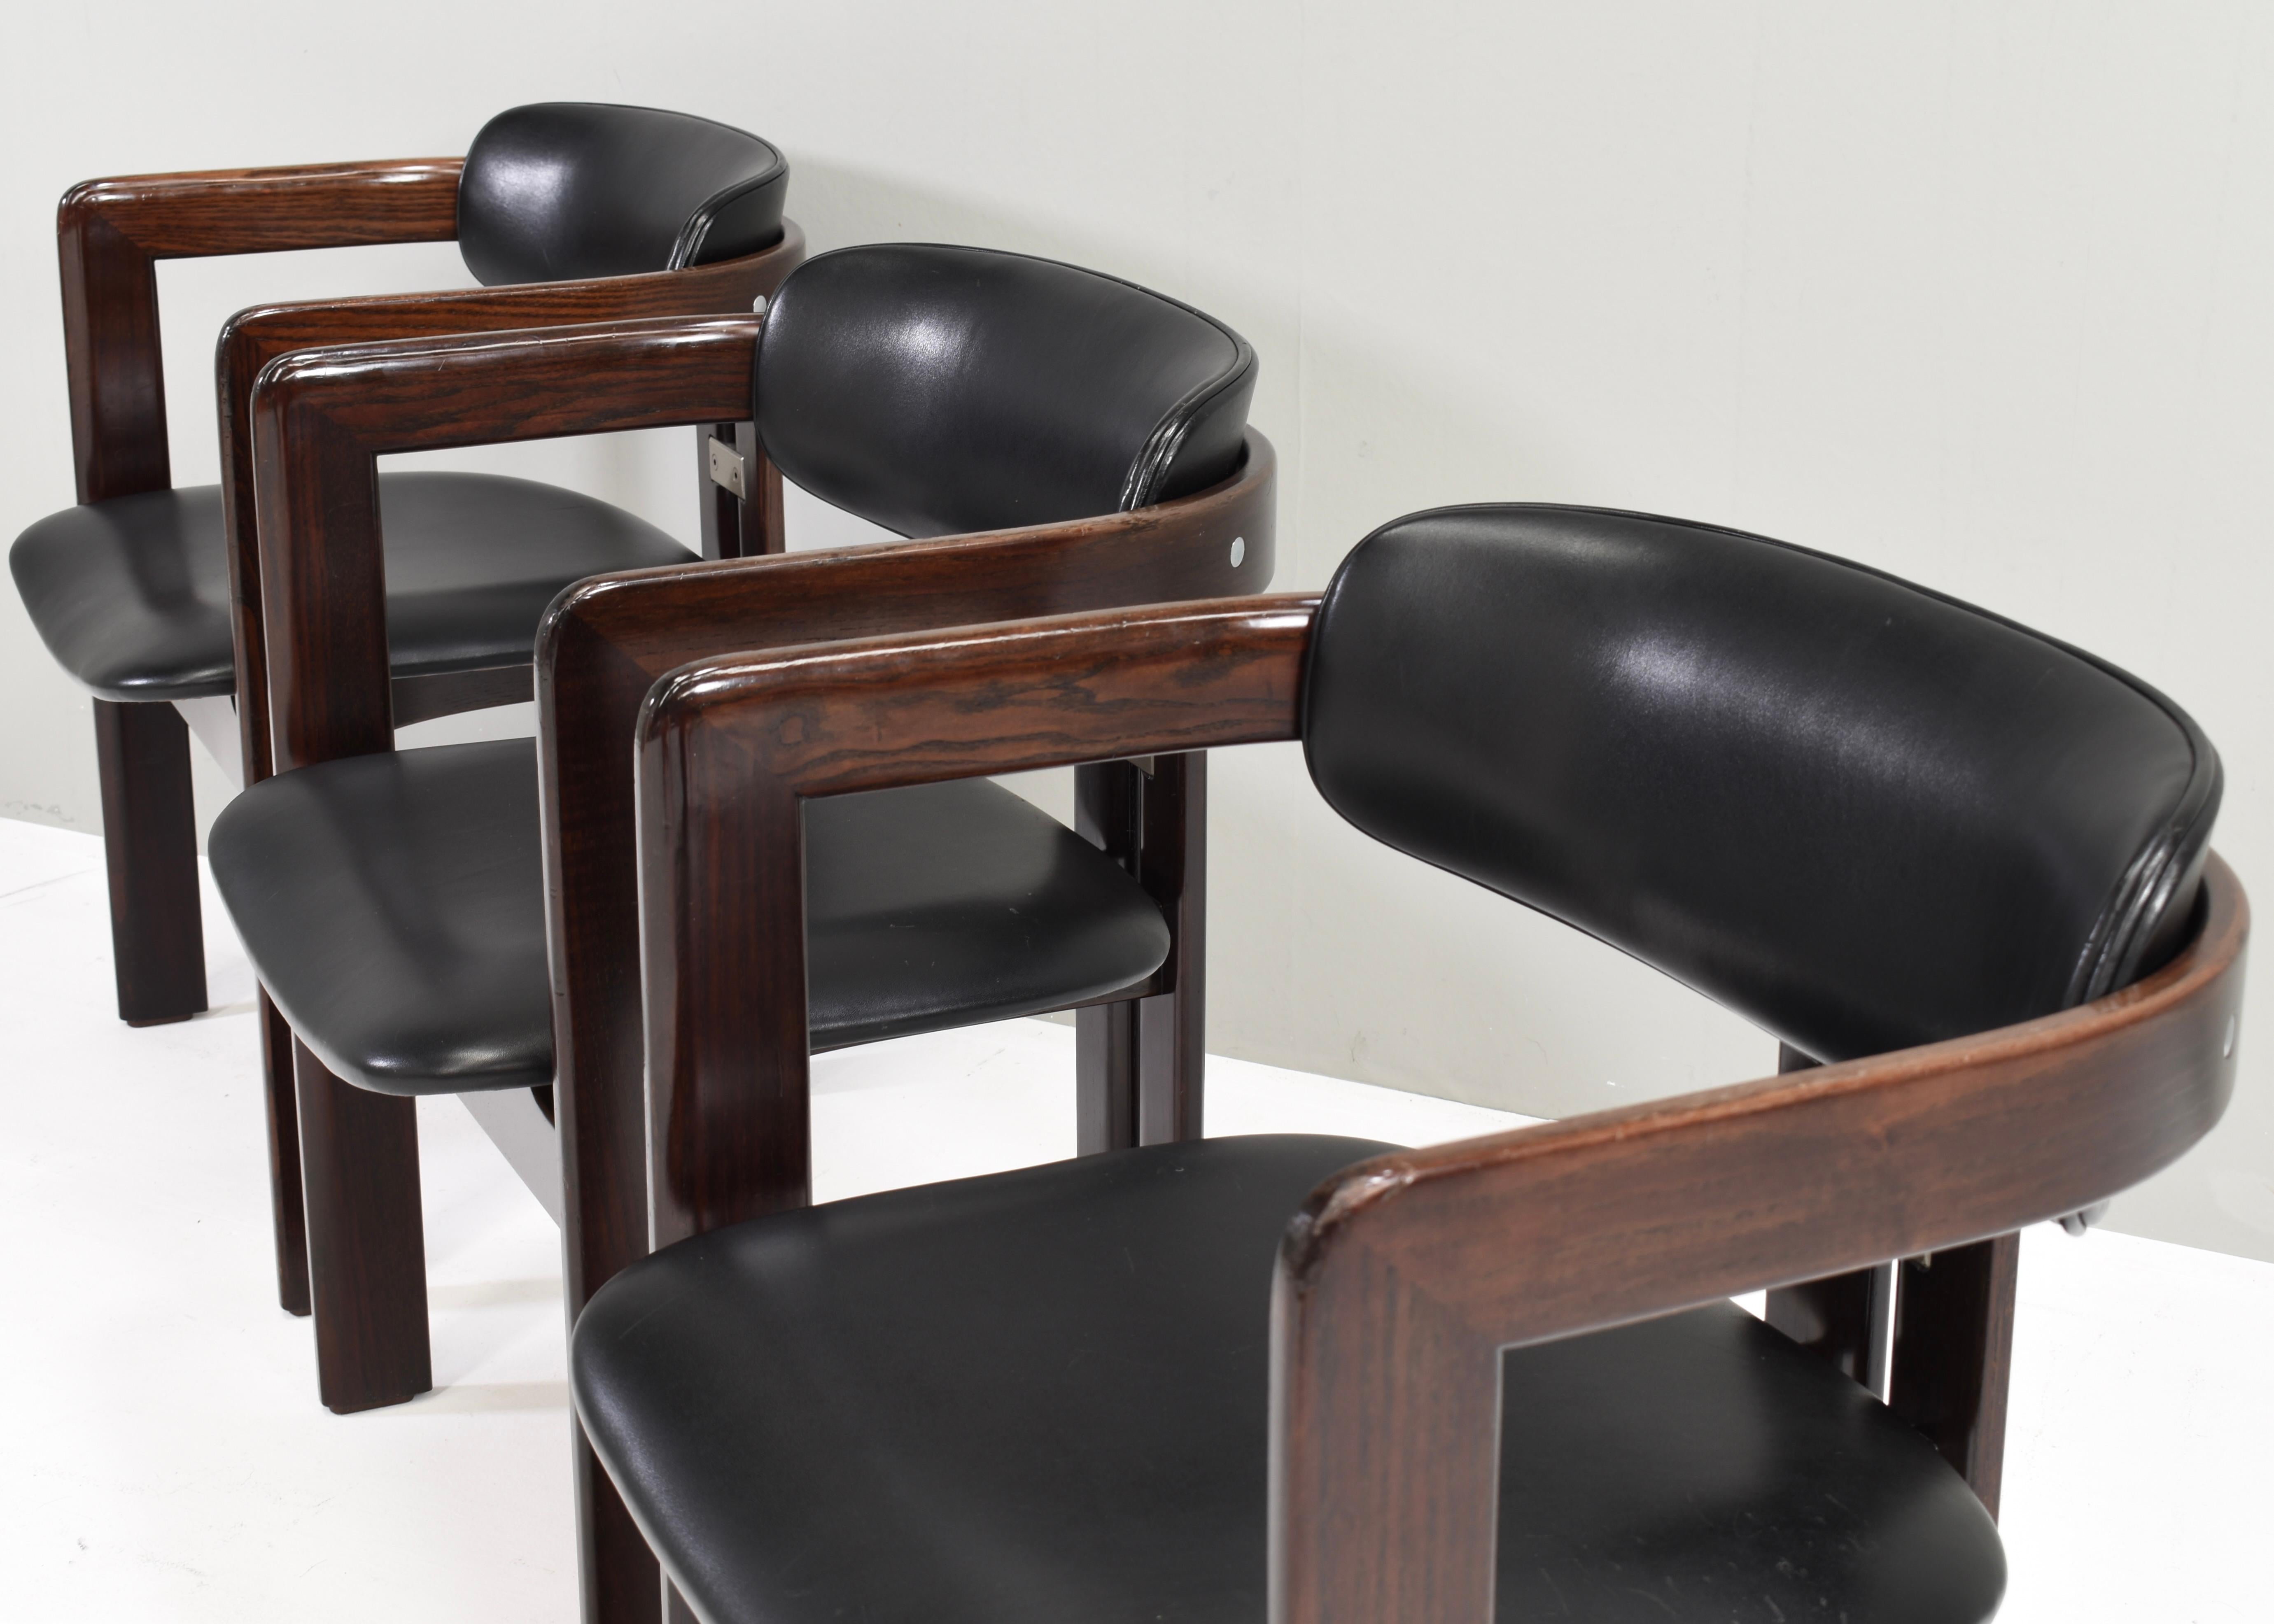 Mid-20th Century Pamplona Chairs by Augusti Savini in Black Leather - Italy, 1965, Set of 3  For Sale